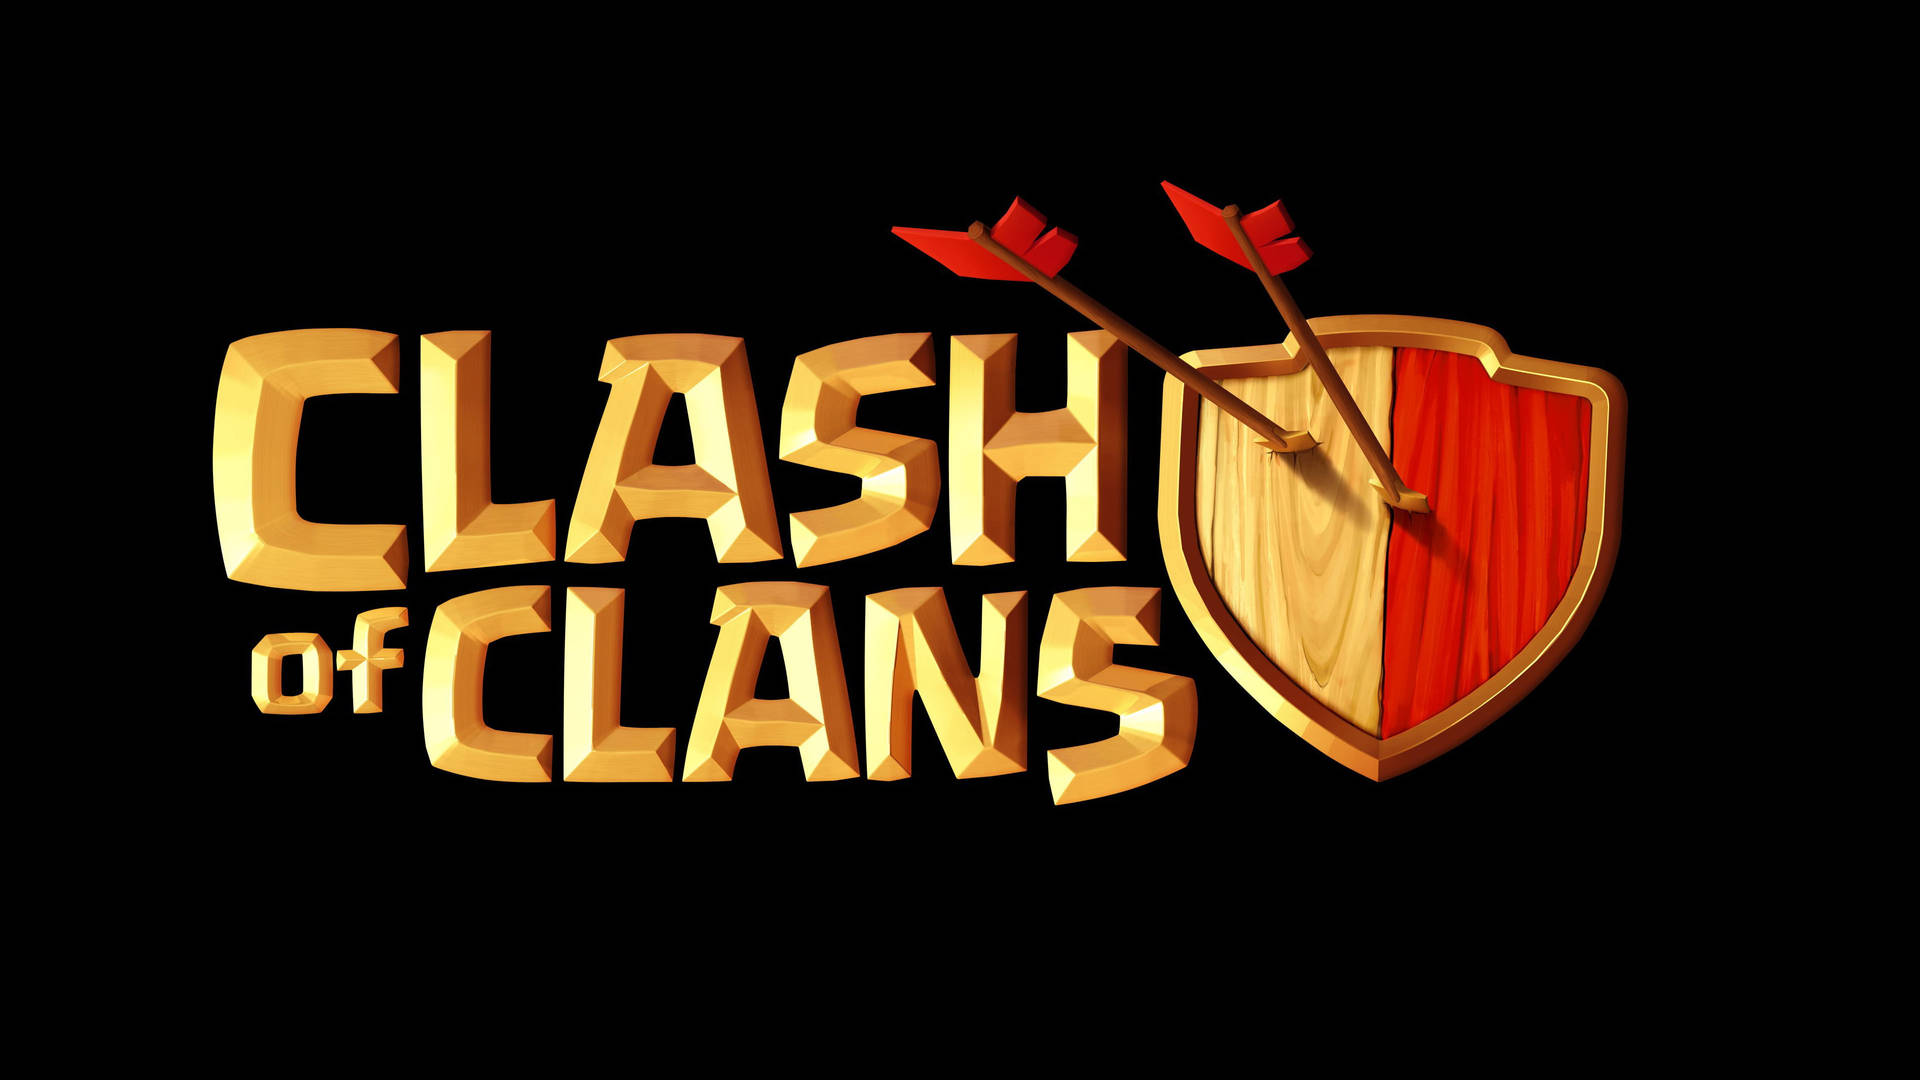 Clash Of Clans Gaming Logo Background